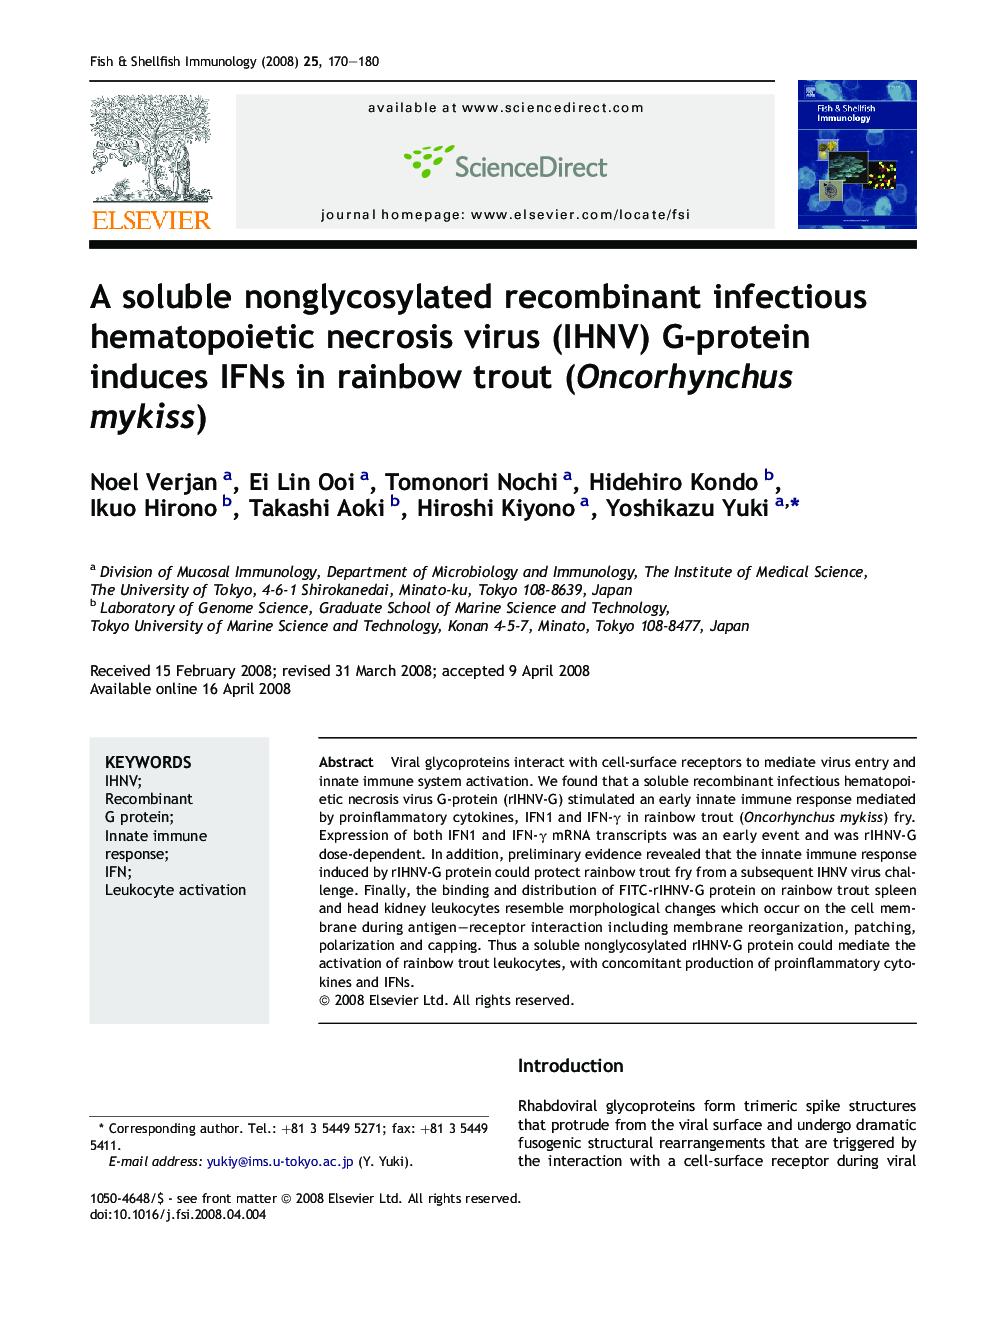 A soluble nonglycosylated recombinant infectious hematopoietic necrosis virus (IHNV) G-protein induces IFNs in rainbow trout (Oncorhynchus mykiss)